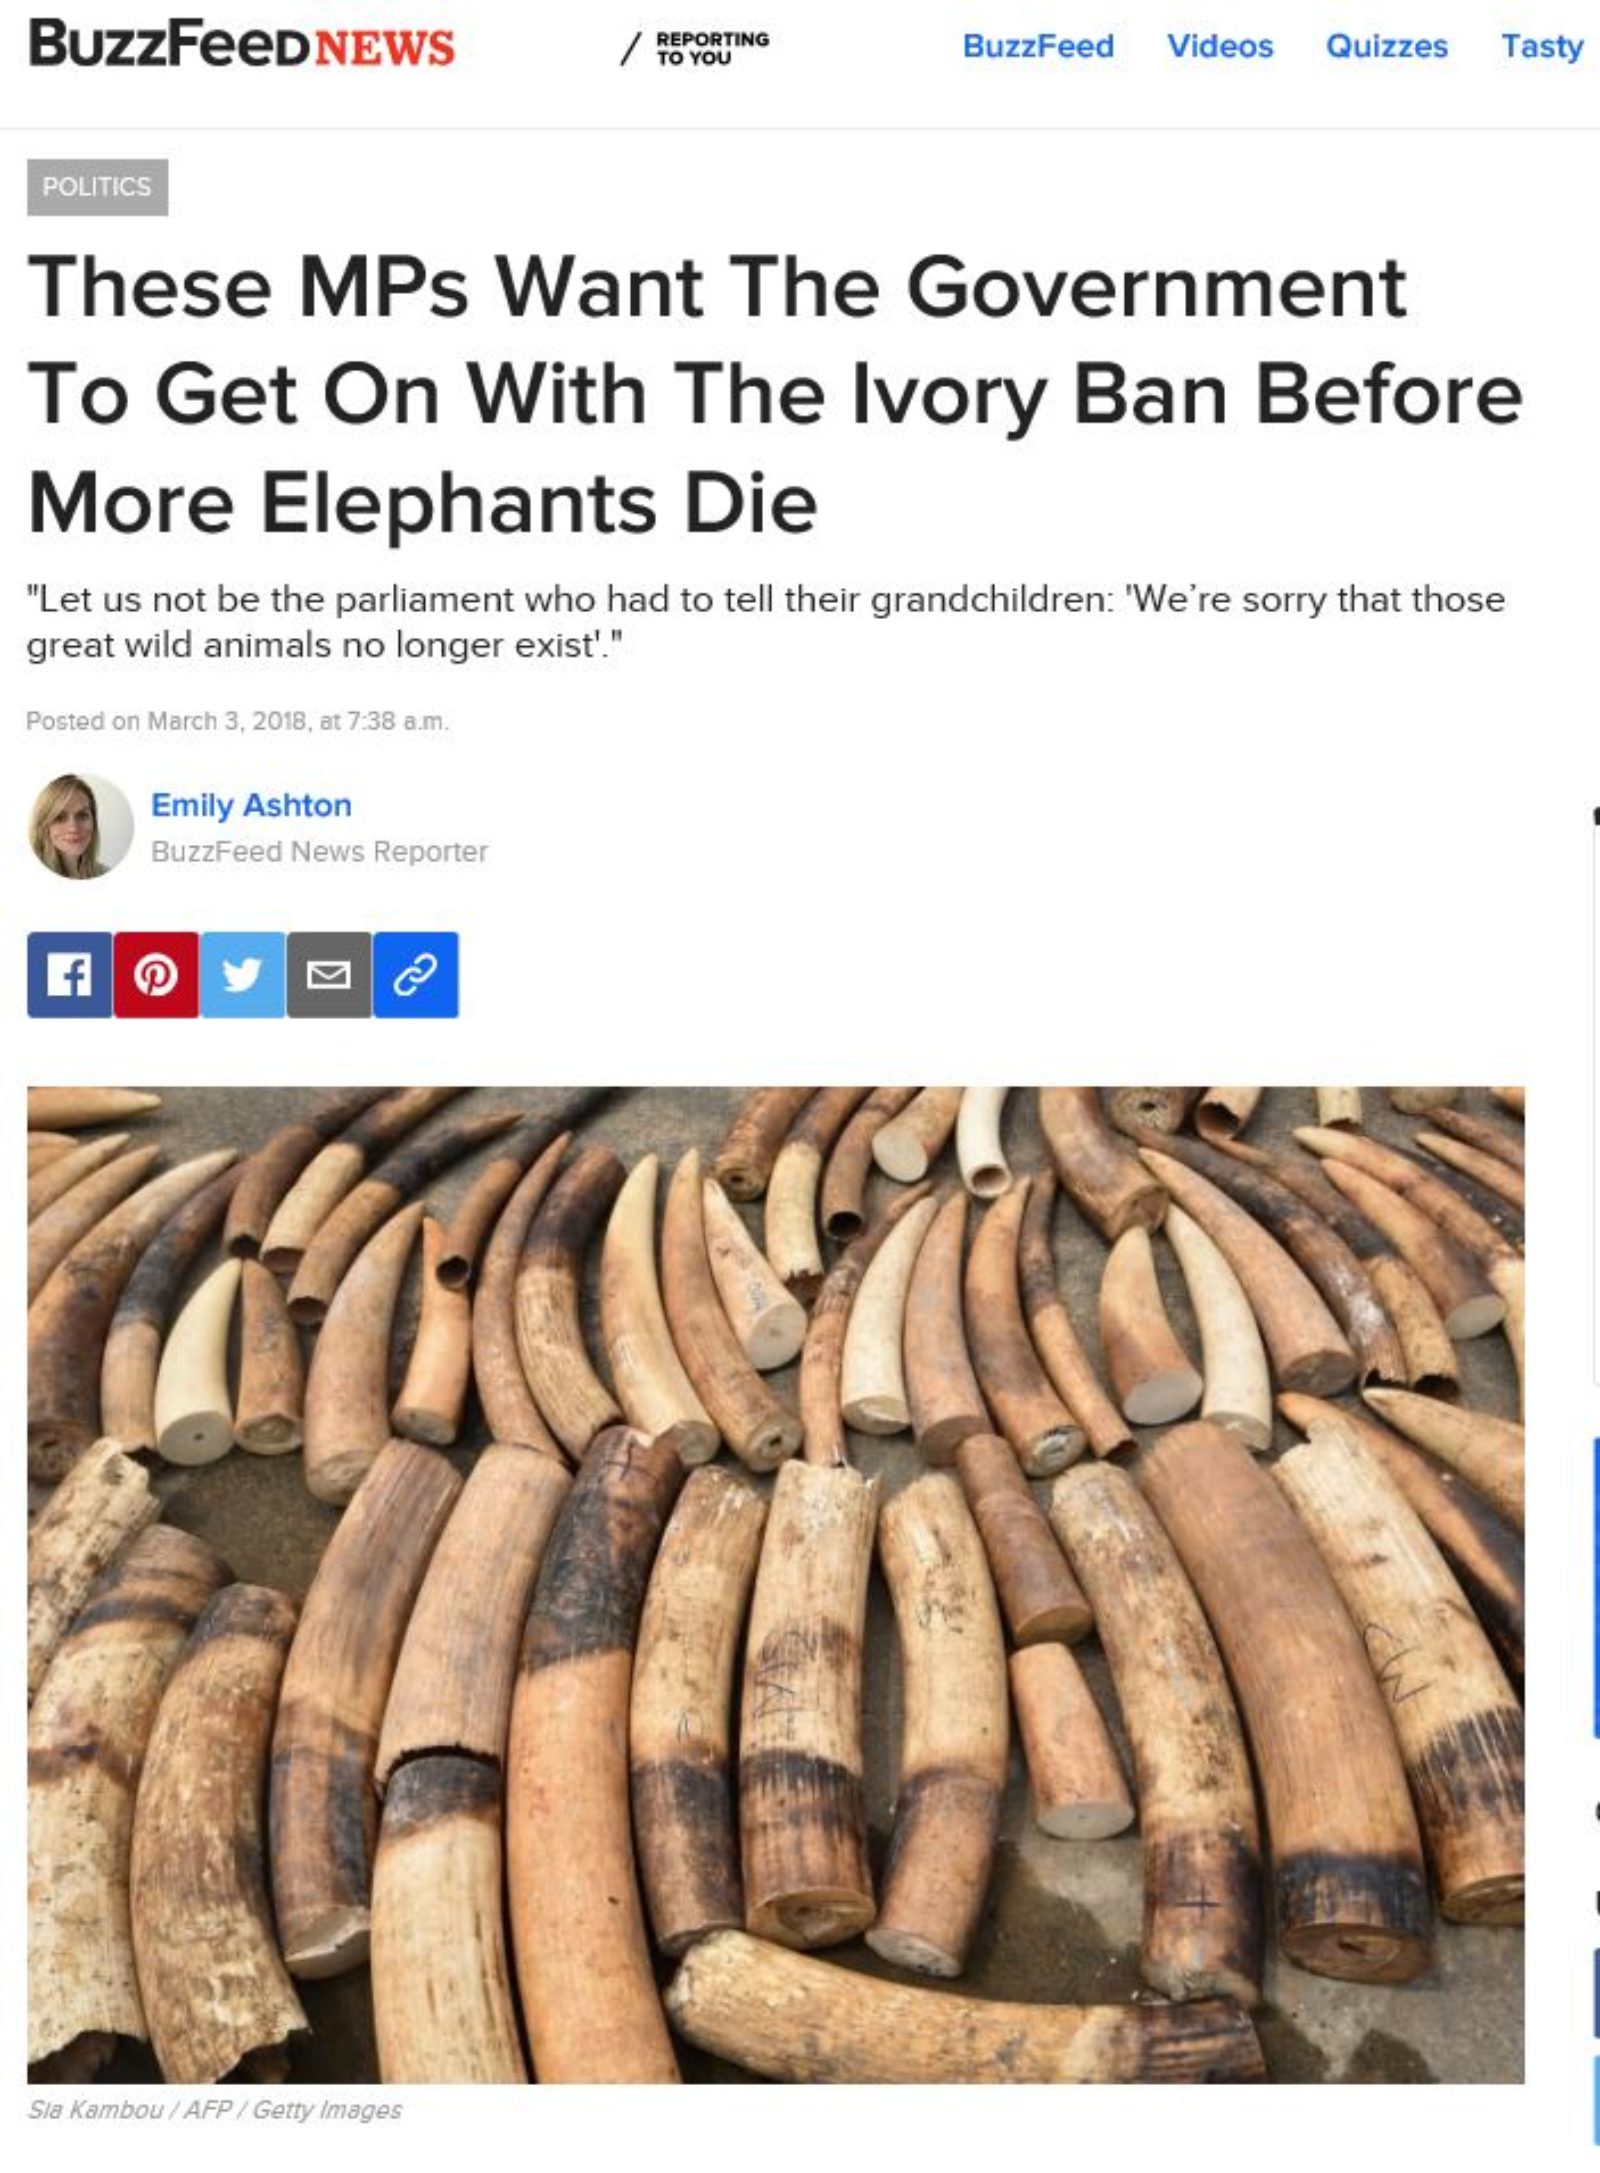 These MPs Want The Government To Get On With The Ivory Ban Before More Elephants Die.